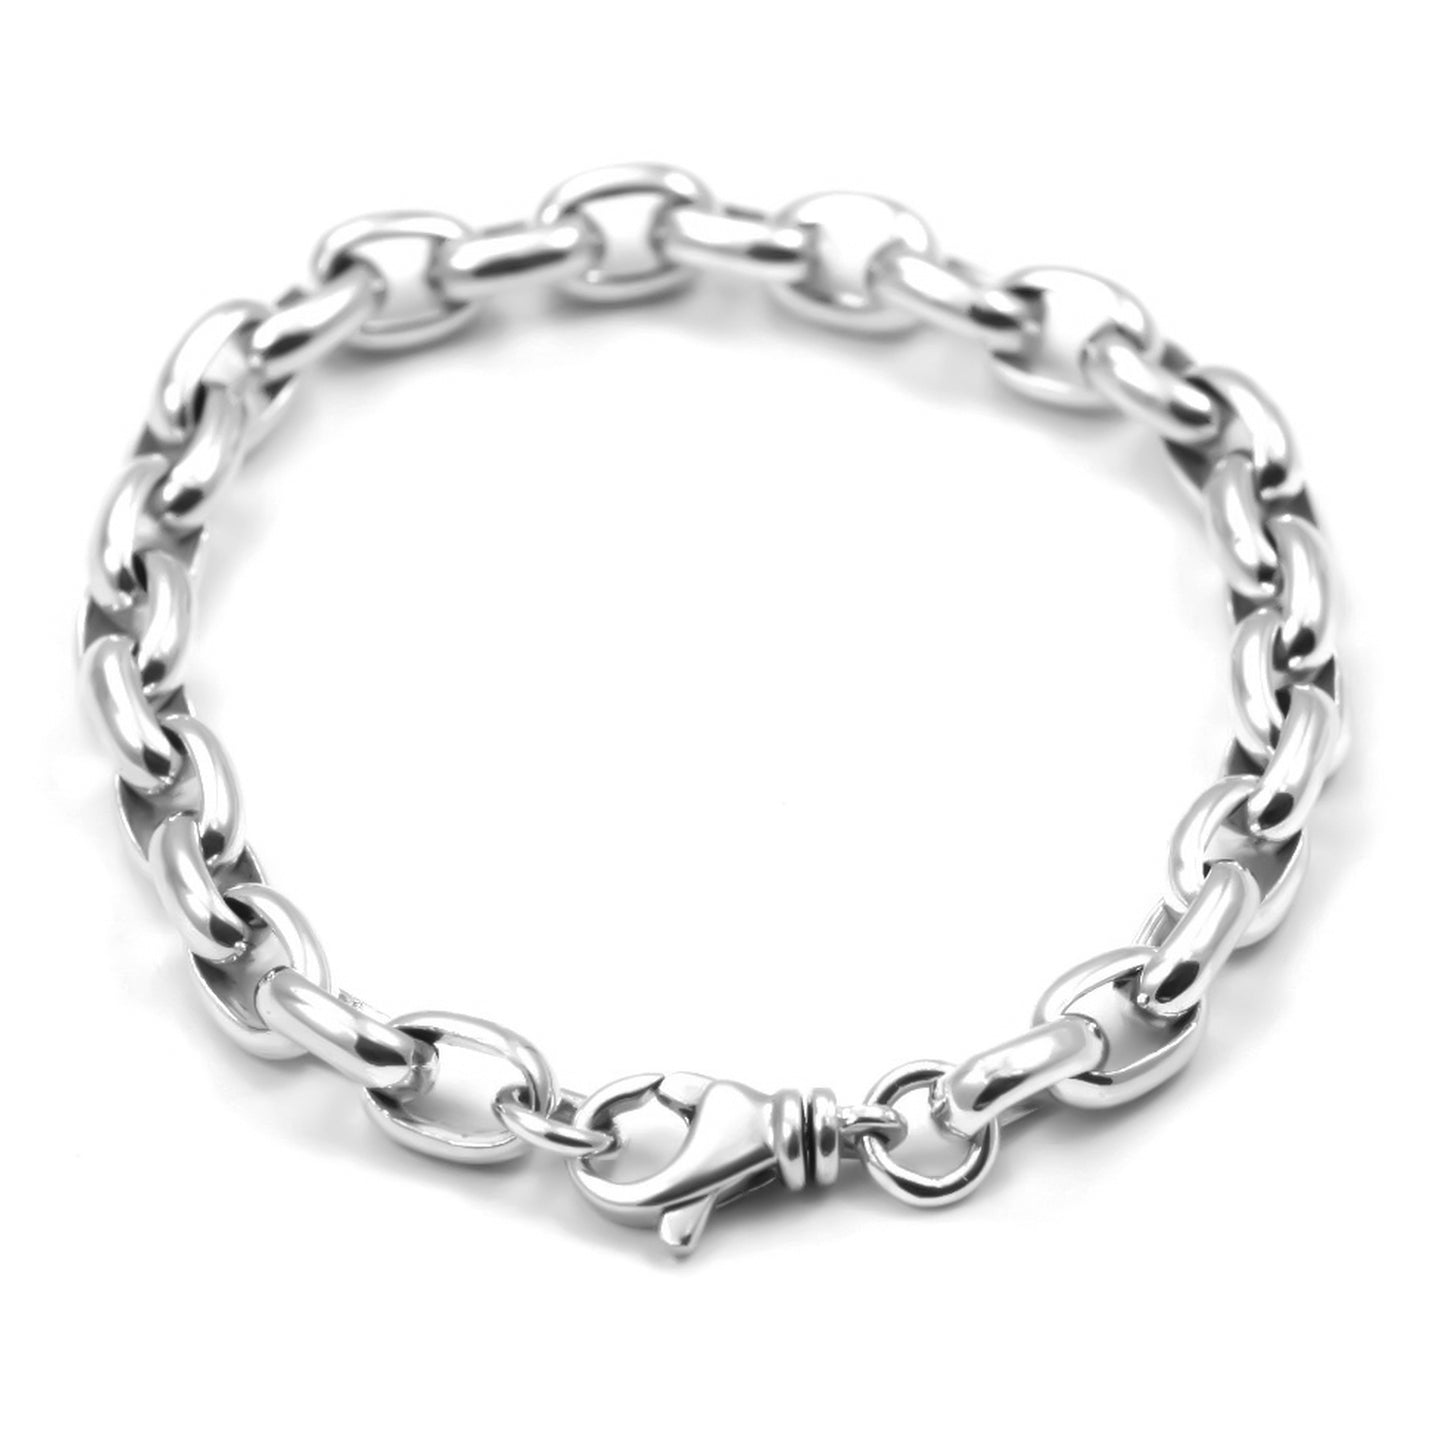 Silver rolo-style shiny link chain bracelet with a lobster clasp.